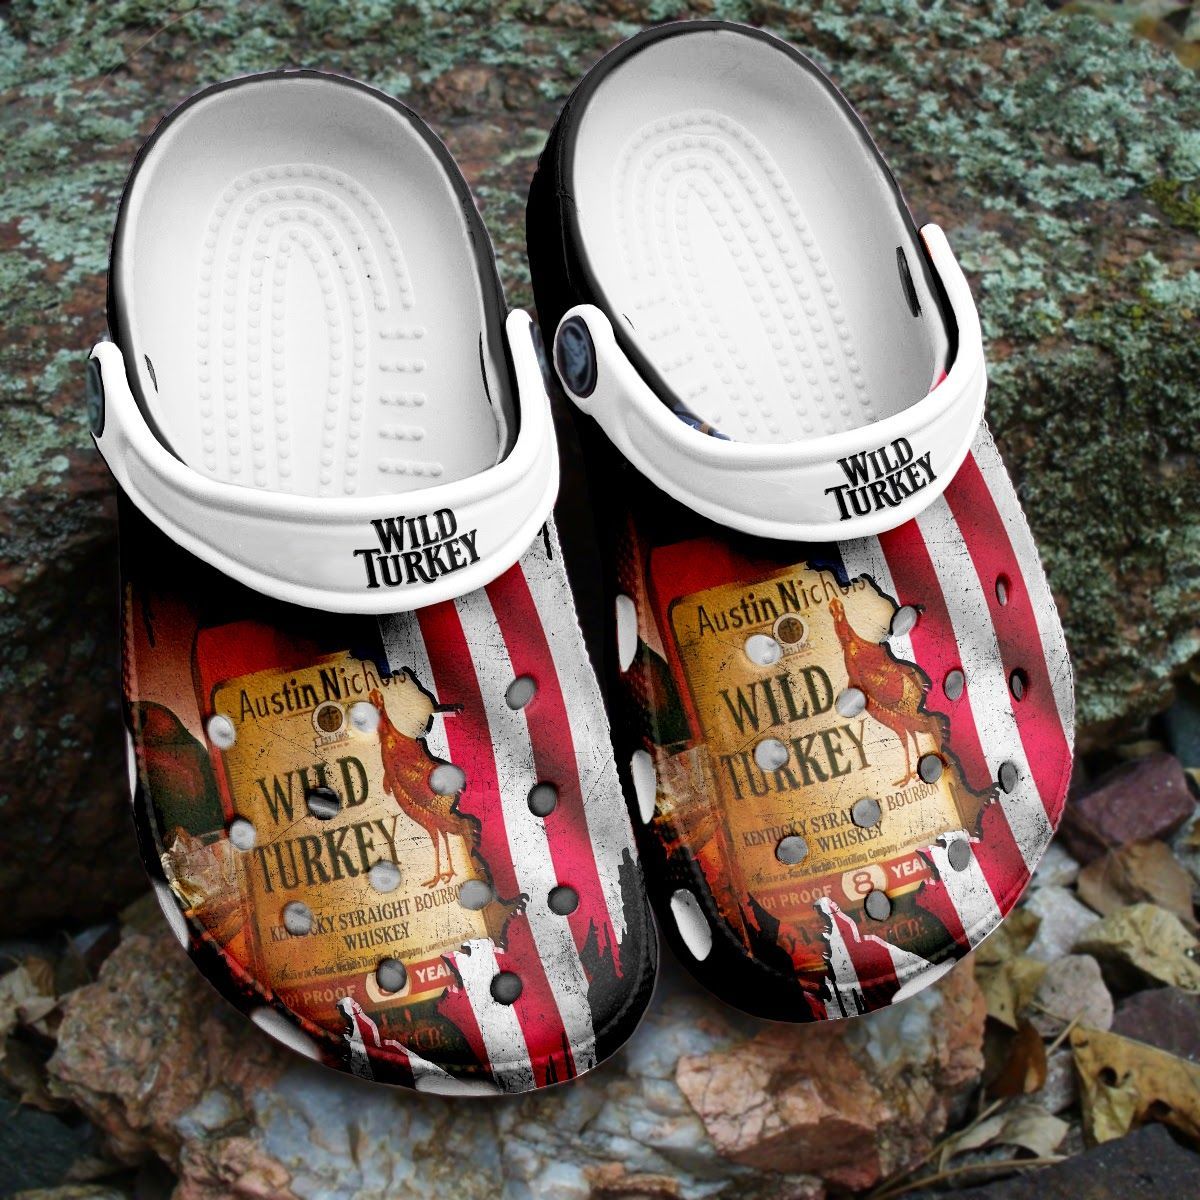 If you'd like to purchase a pair of Crocband Clogs, be sure to check out the official website. 133